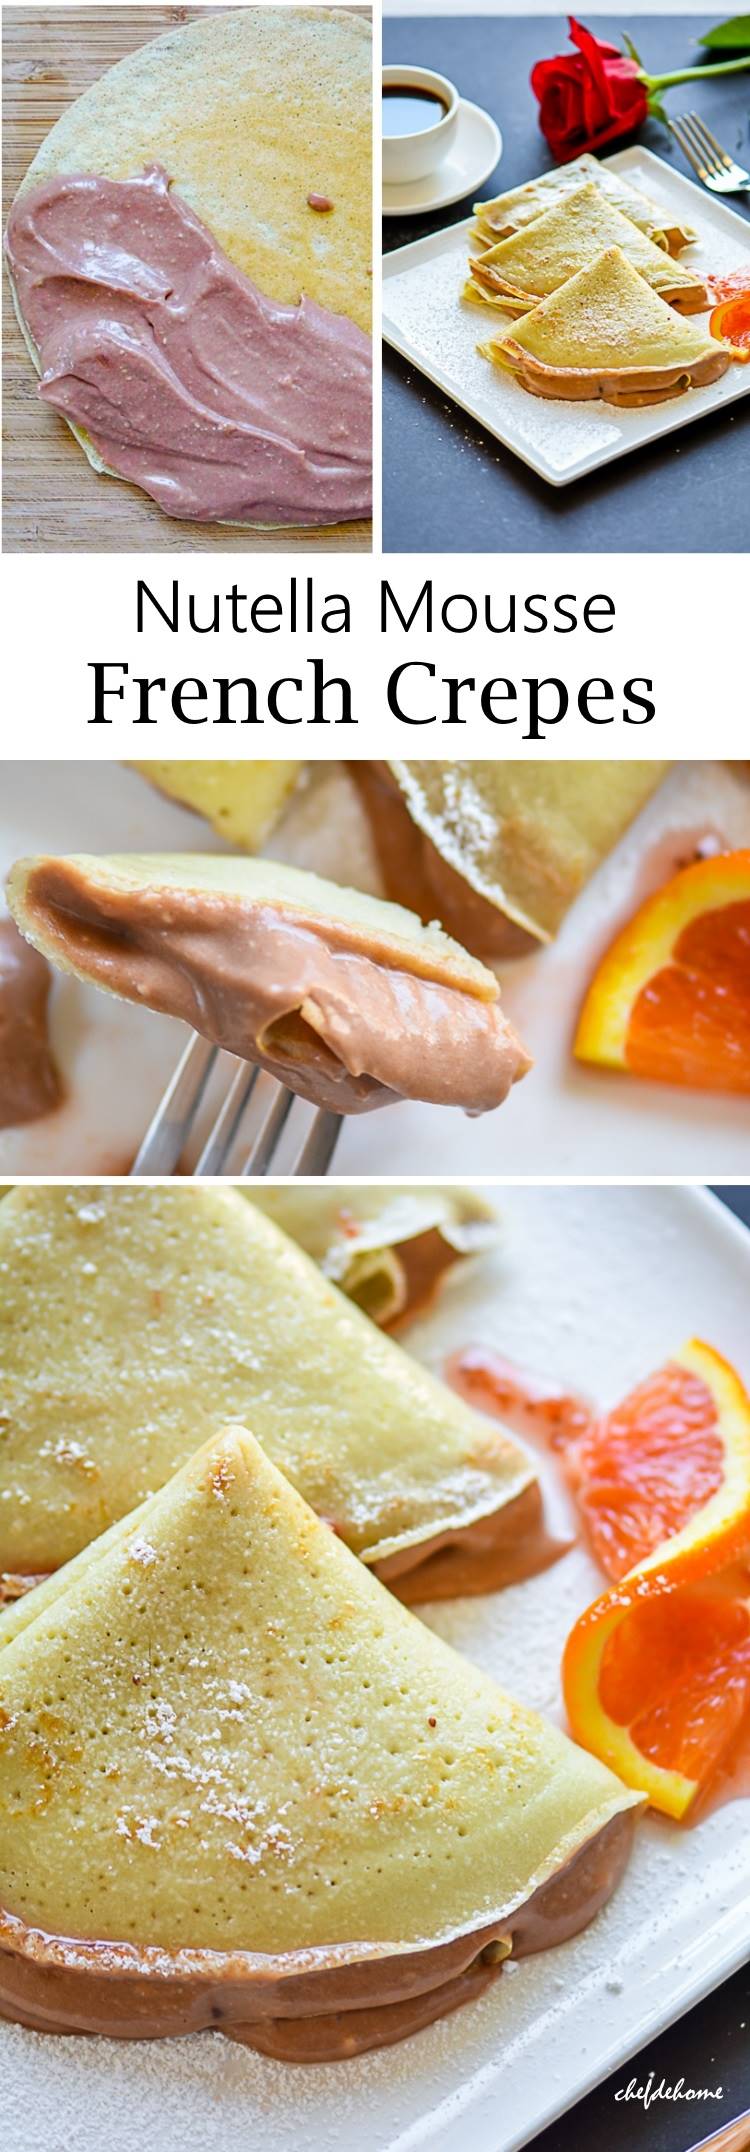 Nutella Mousse Crepes for Breakfast for a family Breakfast at home | chefdehome.com